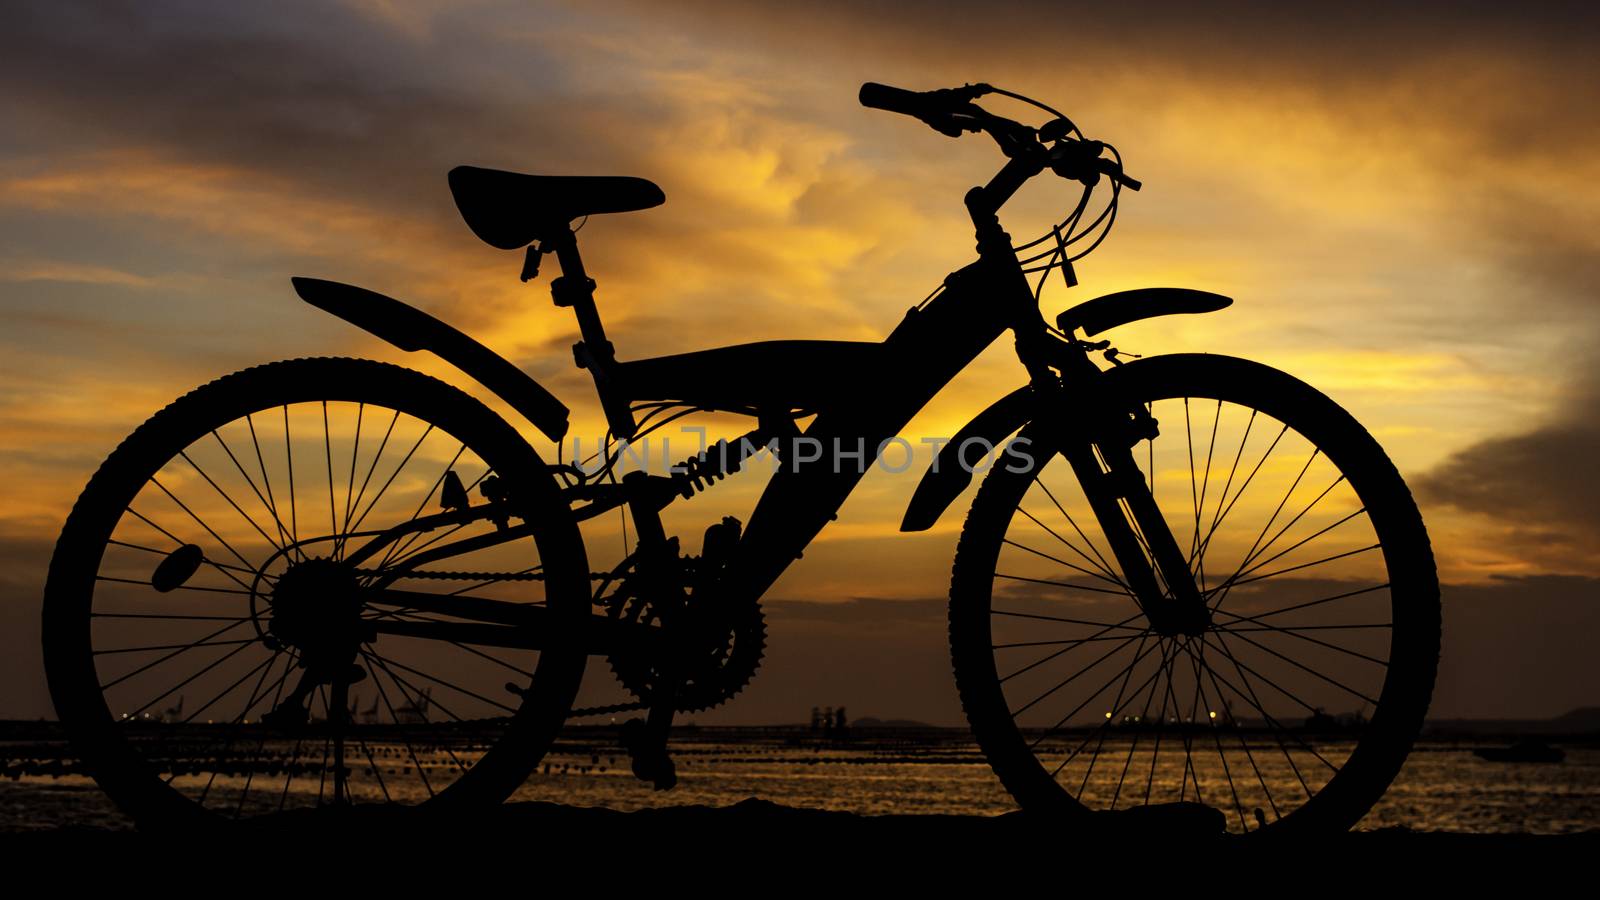 Silhouette of mountain bike with sunset sky beside sea, Thailand by pixbox77